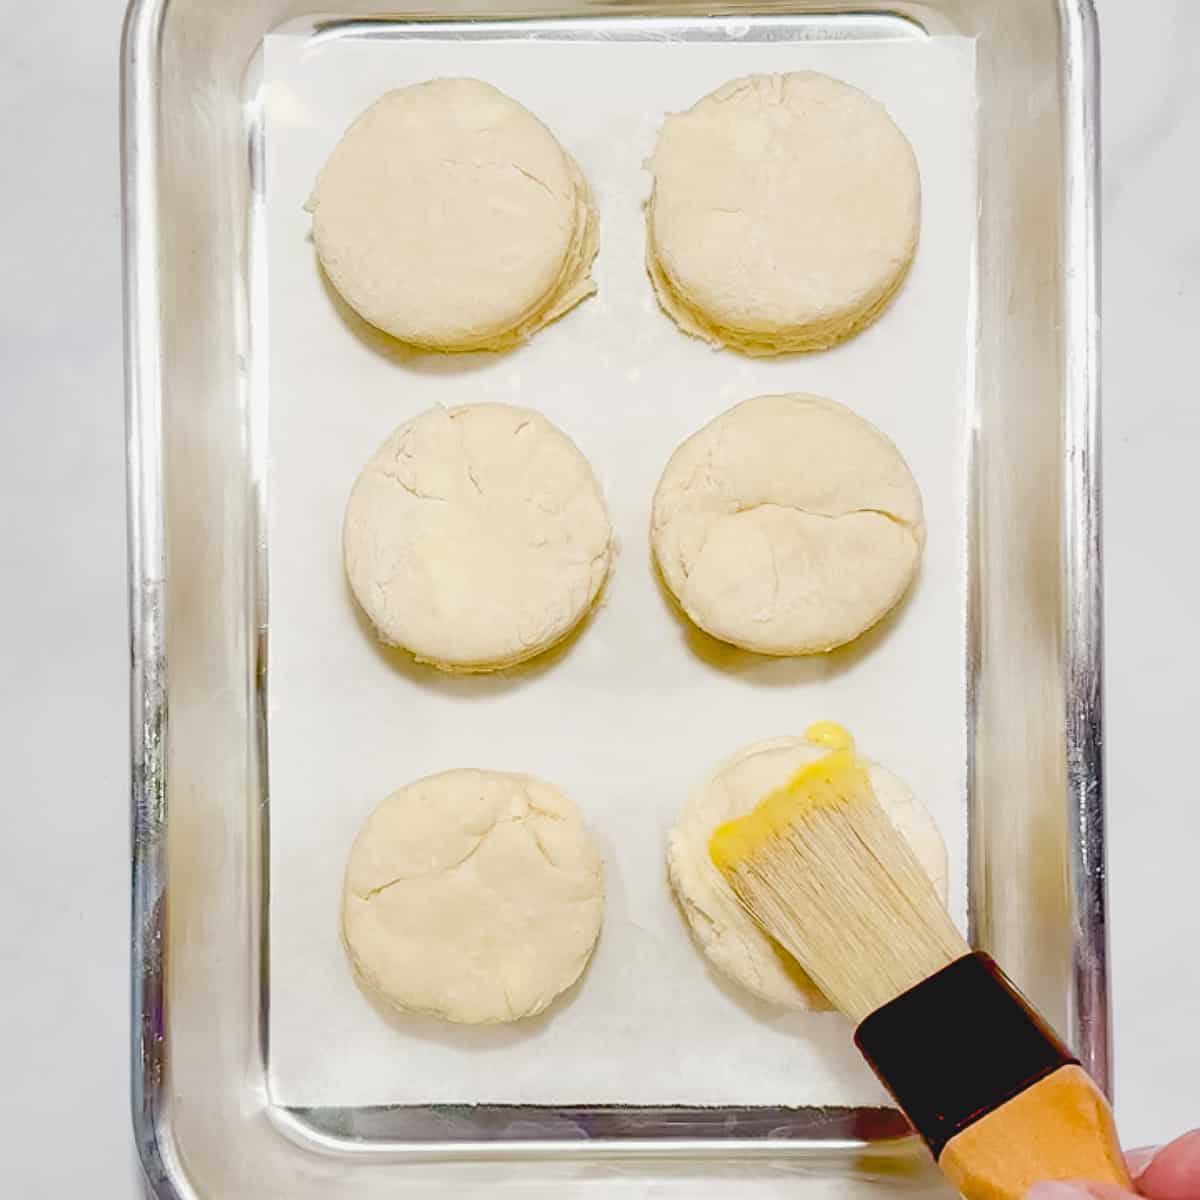 brushing an egg wash on unbaked biscuits.